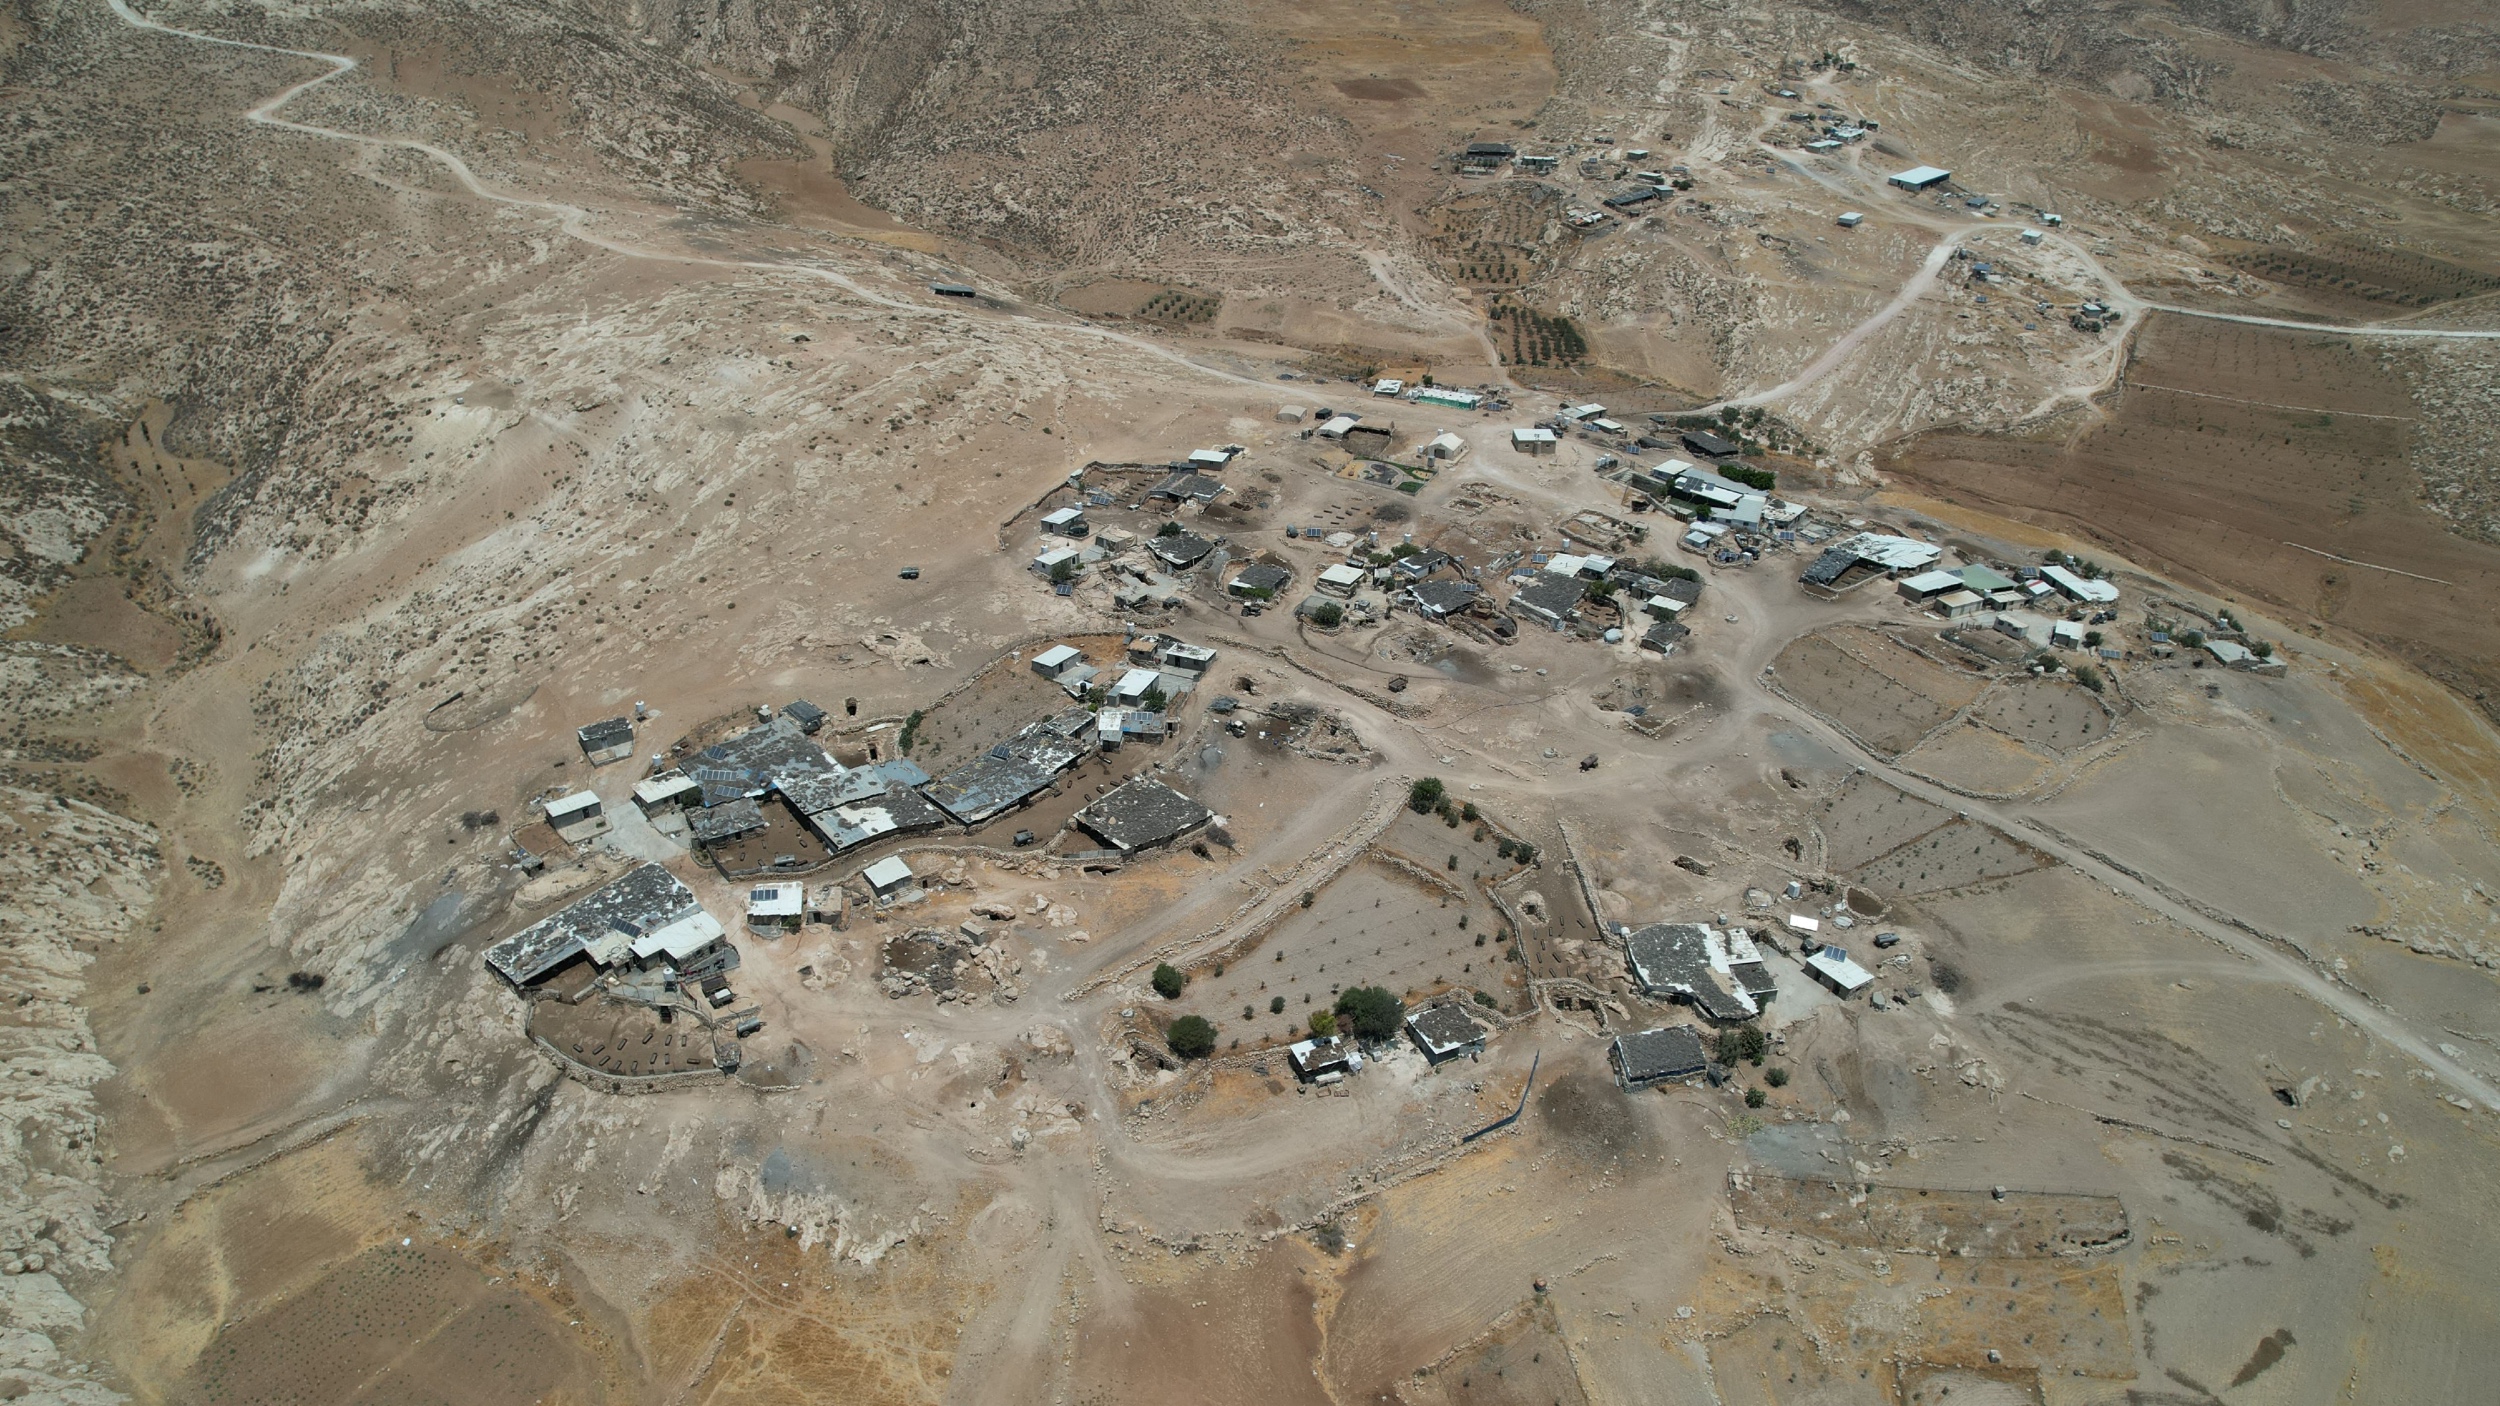 An aerial view of Janba village south of Hebron in the occupied West Bank taken on 19 June 2022 (MEE/Hisham Abu Shaqrah)